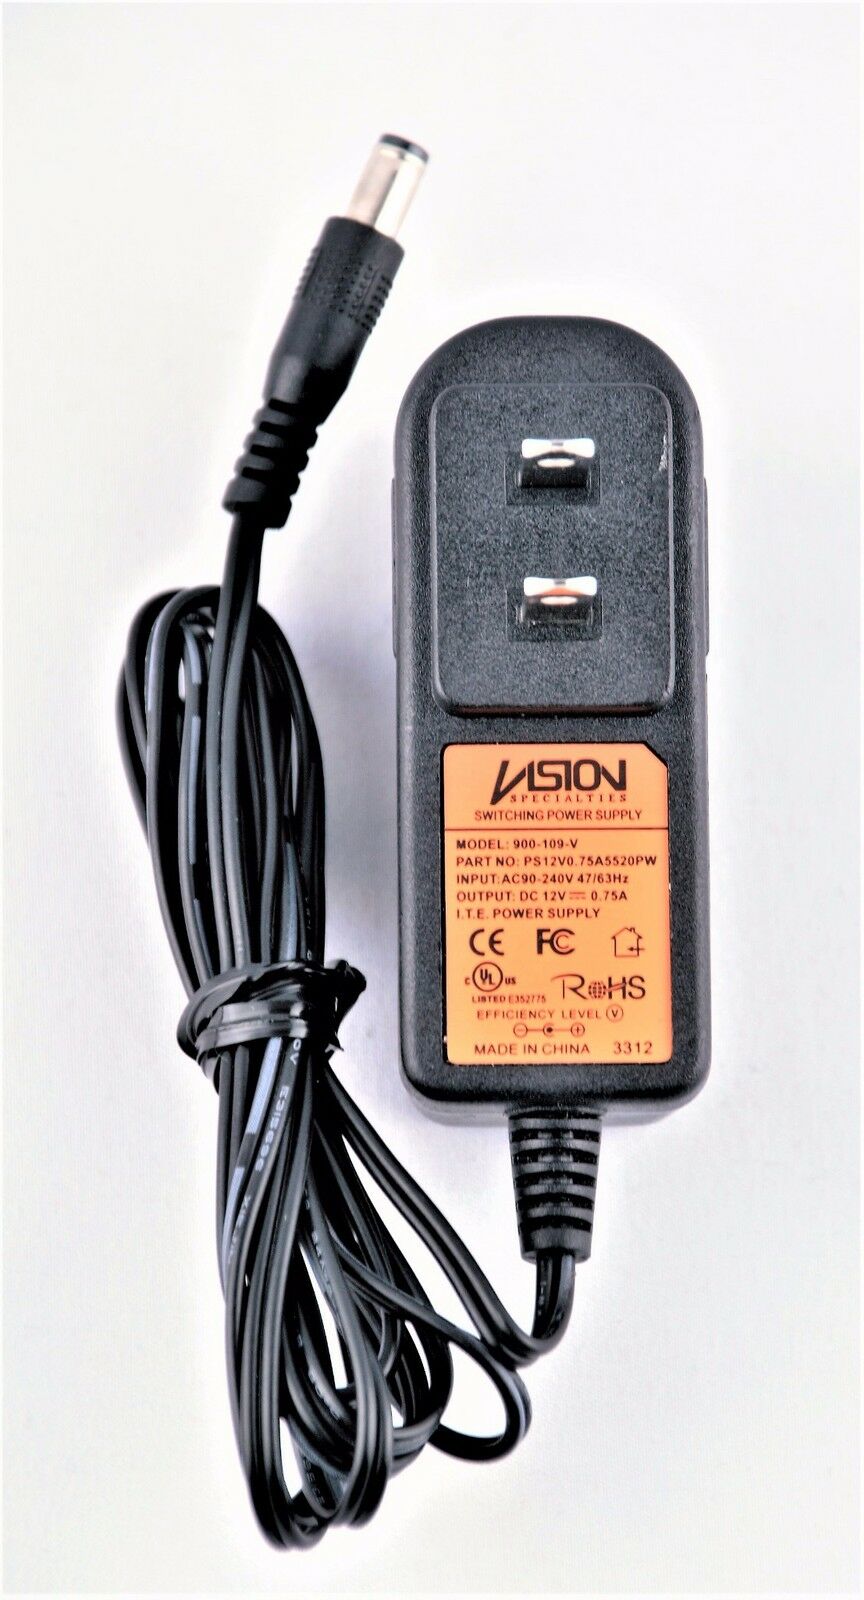 New VISION 900-109-V PS12V0.75A5520PW 12V 0.75A AC ADAPTER POWER CHARGER